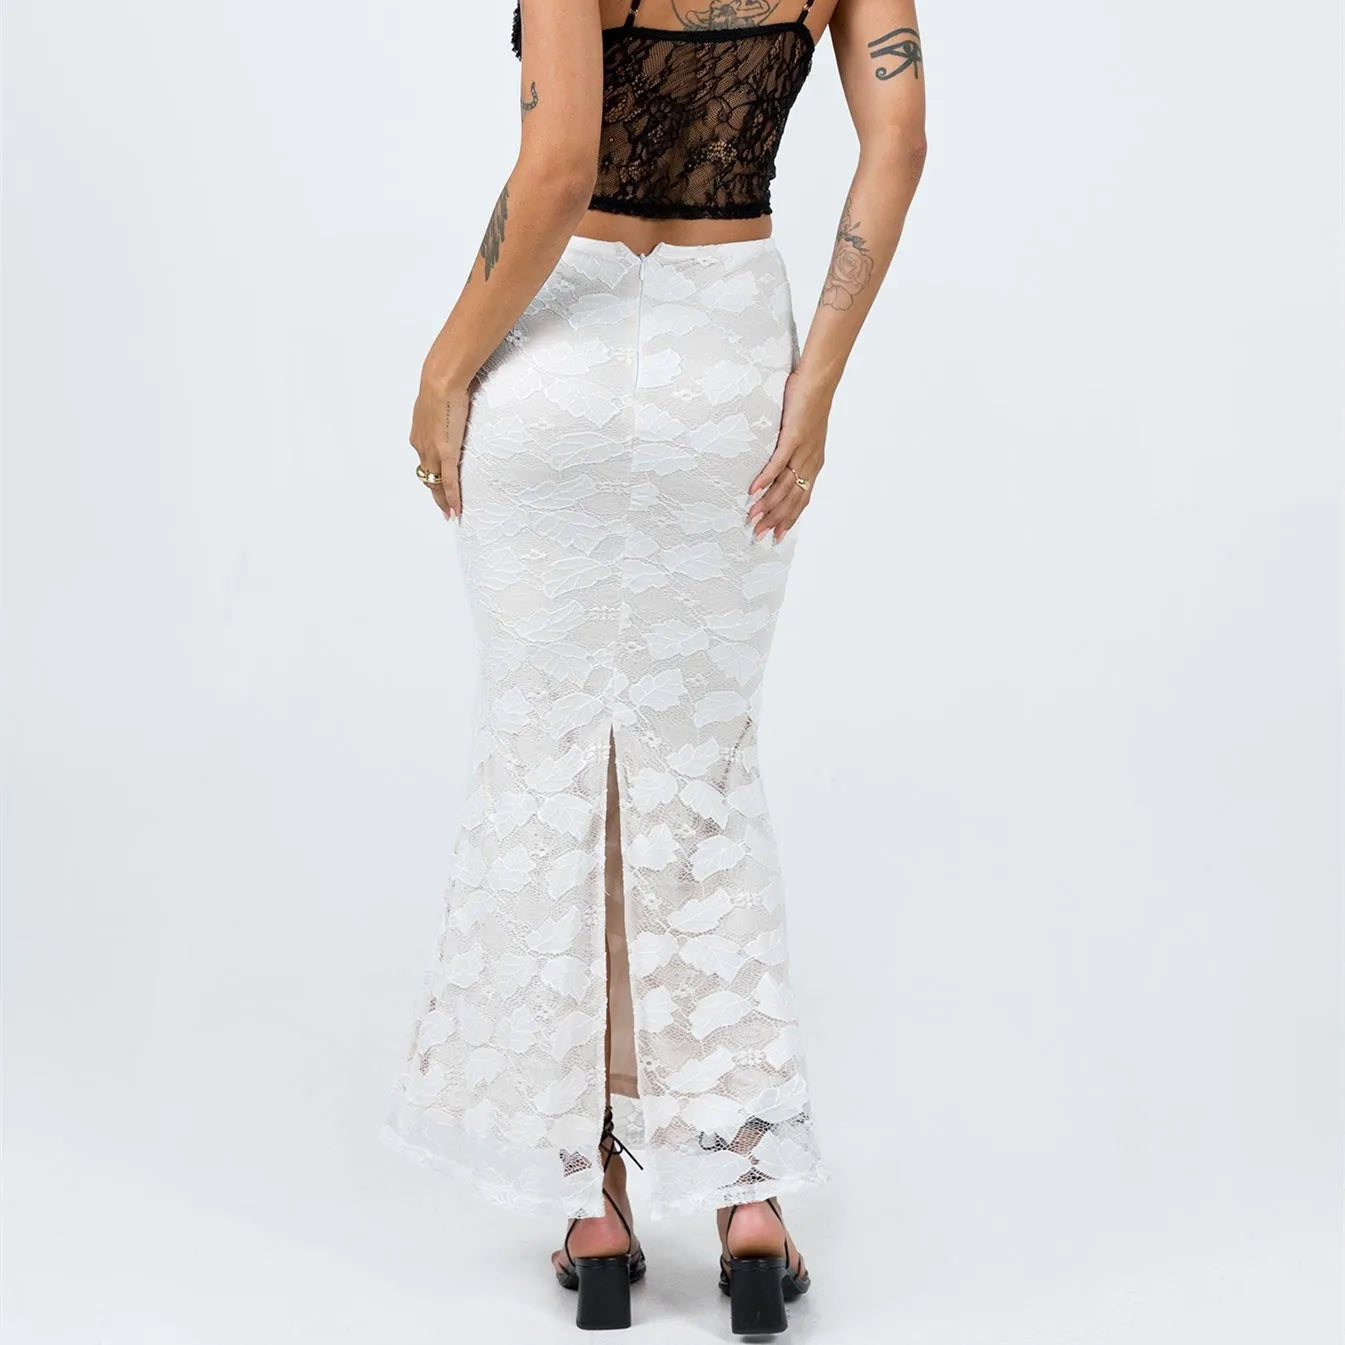 FashionSierra - Women's Sheer Skirt White Elastic Band Fitted Lace Floral Pencil Fairy Cottage Streetwear Midi Dress